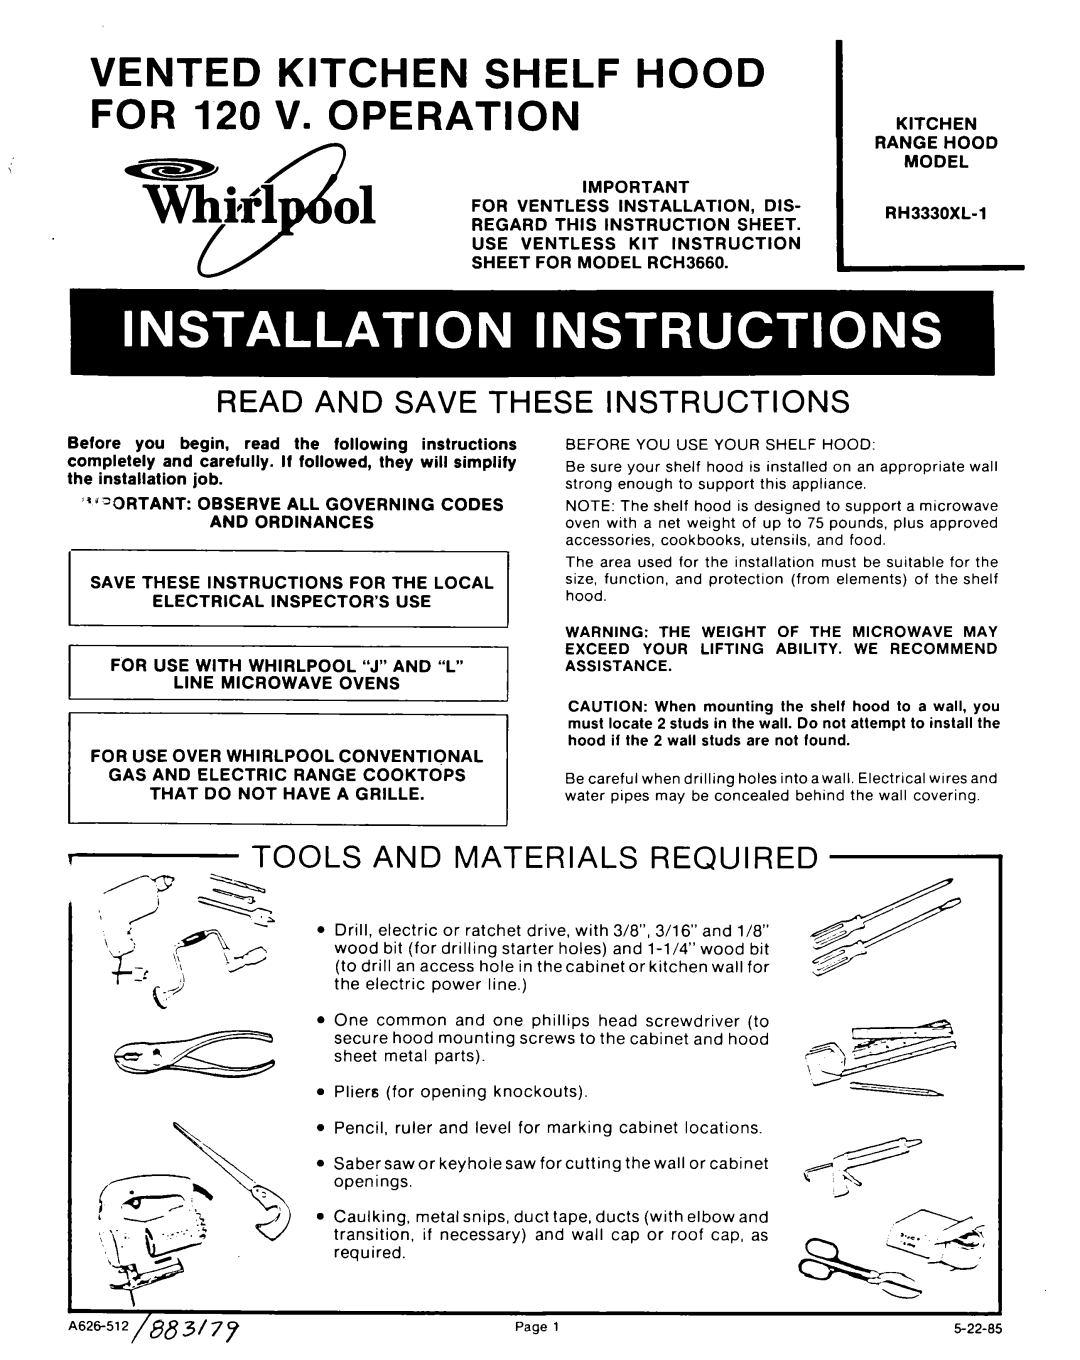 Whirlpool RCH3660 instruction sheet Read And Save These Instructions, Tools And Materials Required 